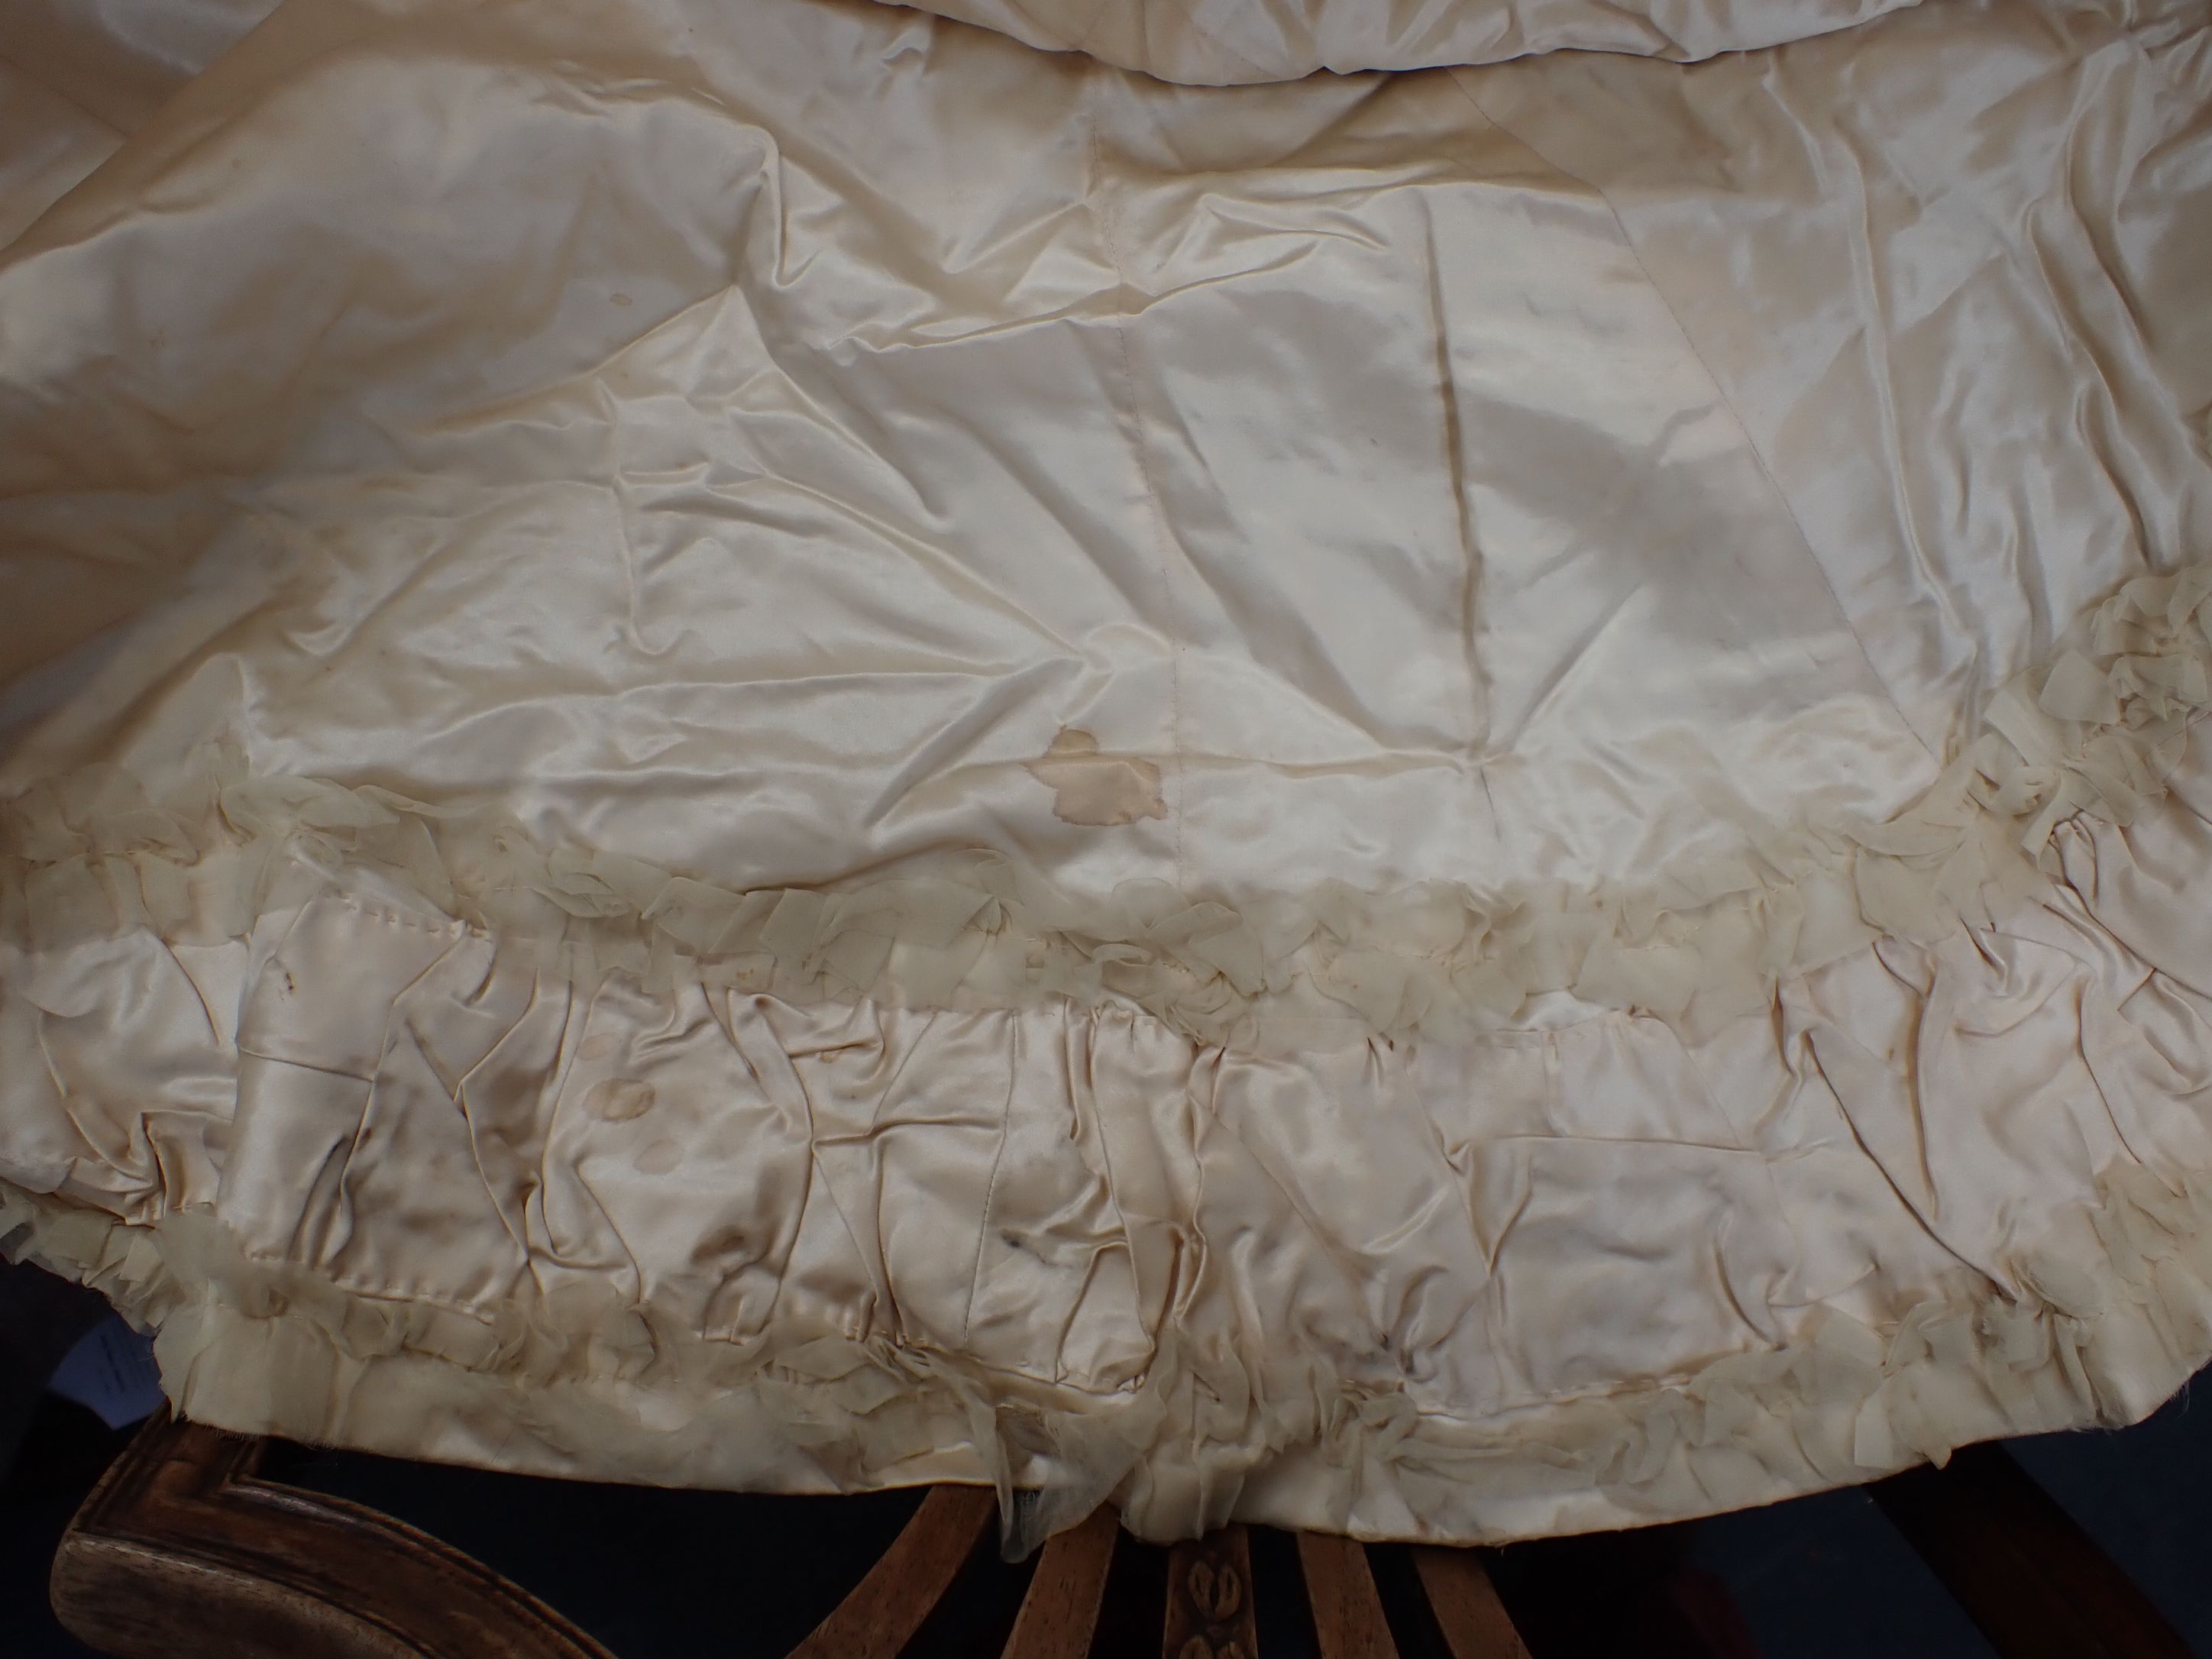 A LATE VICTORIAN SILK WEDDING DRESS, WITH LACE COLLAR AND PANELS - Image 3 of 11